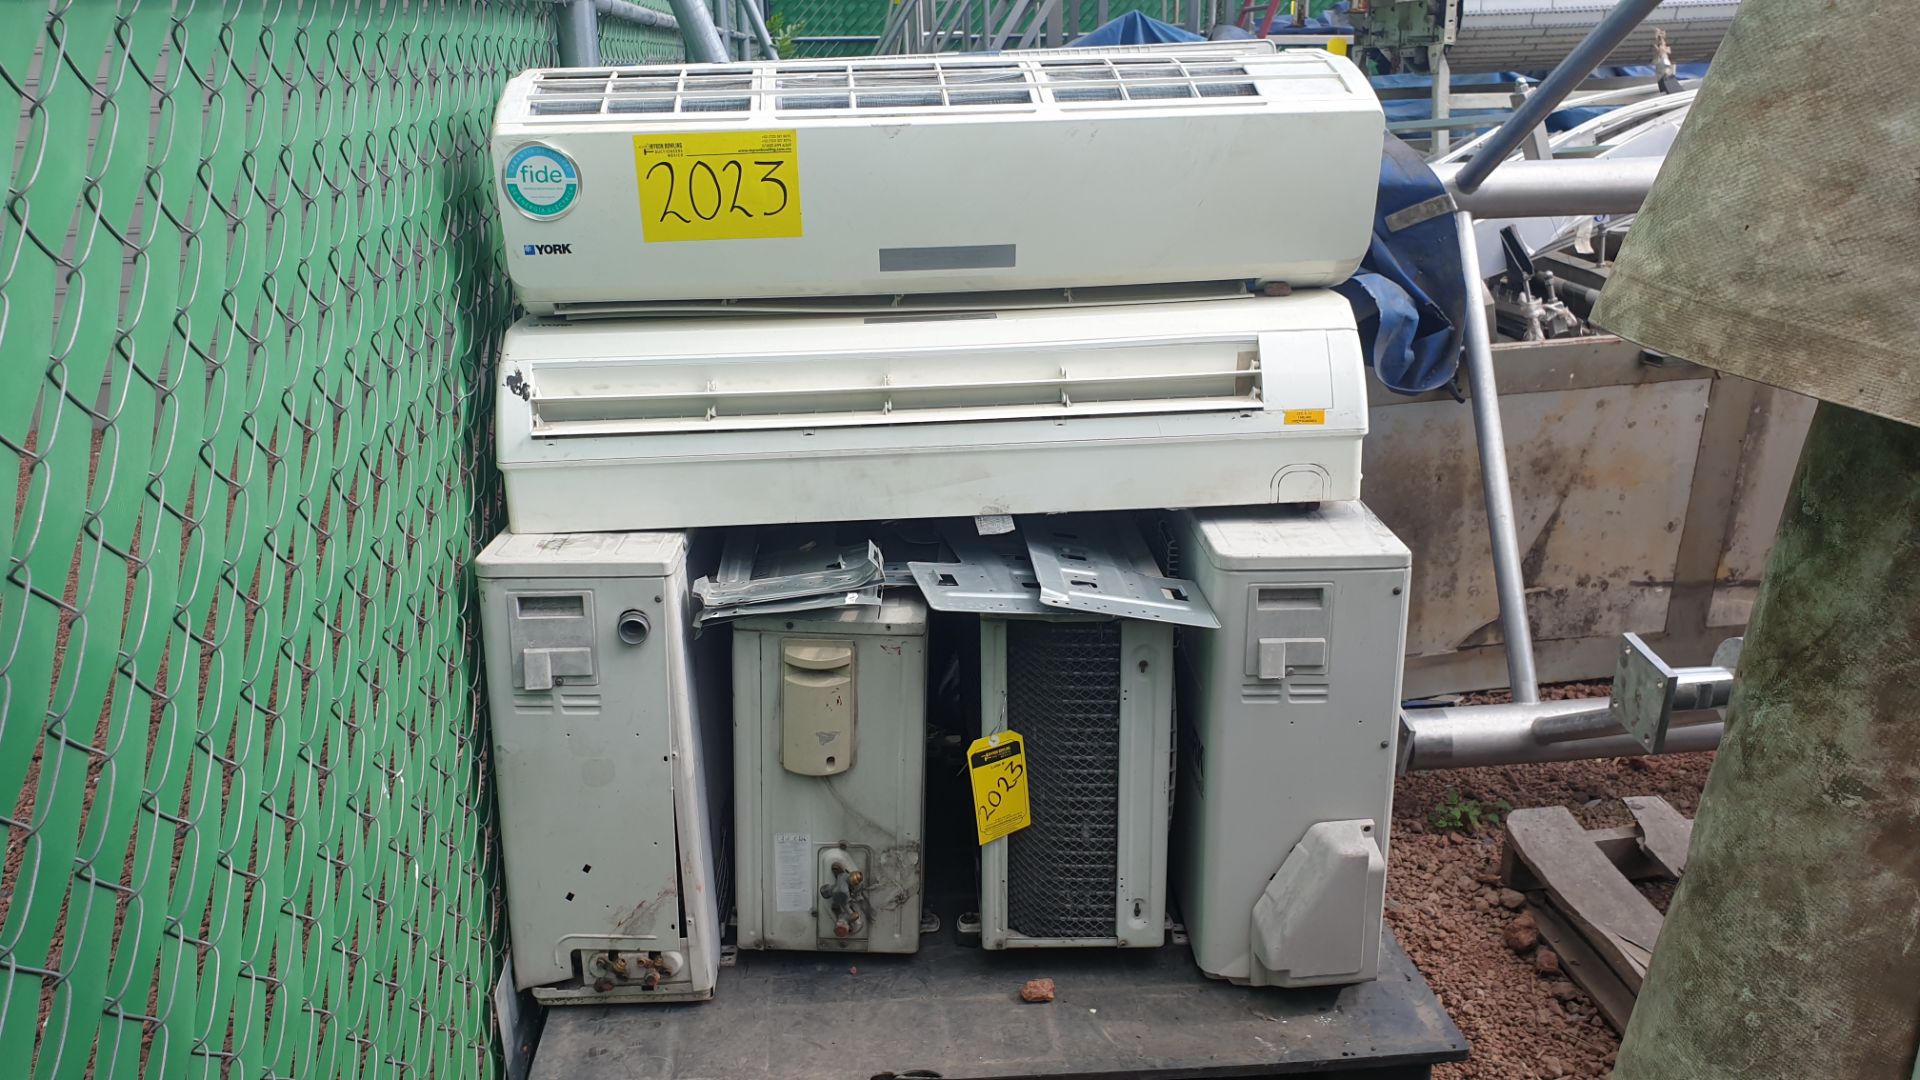 1 Air- conditioning lot, includes 4 York condenser units